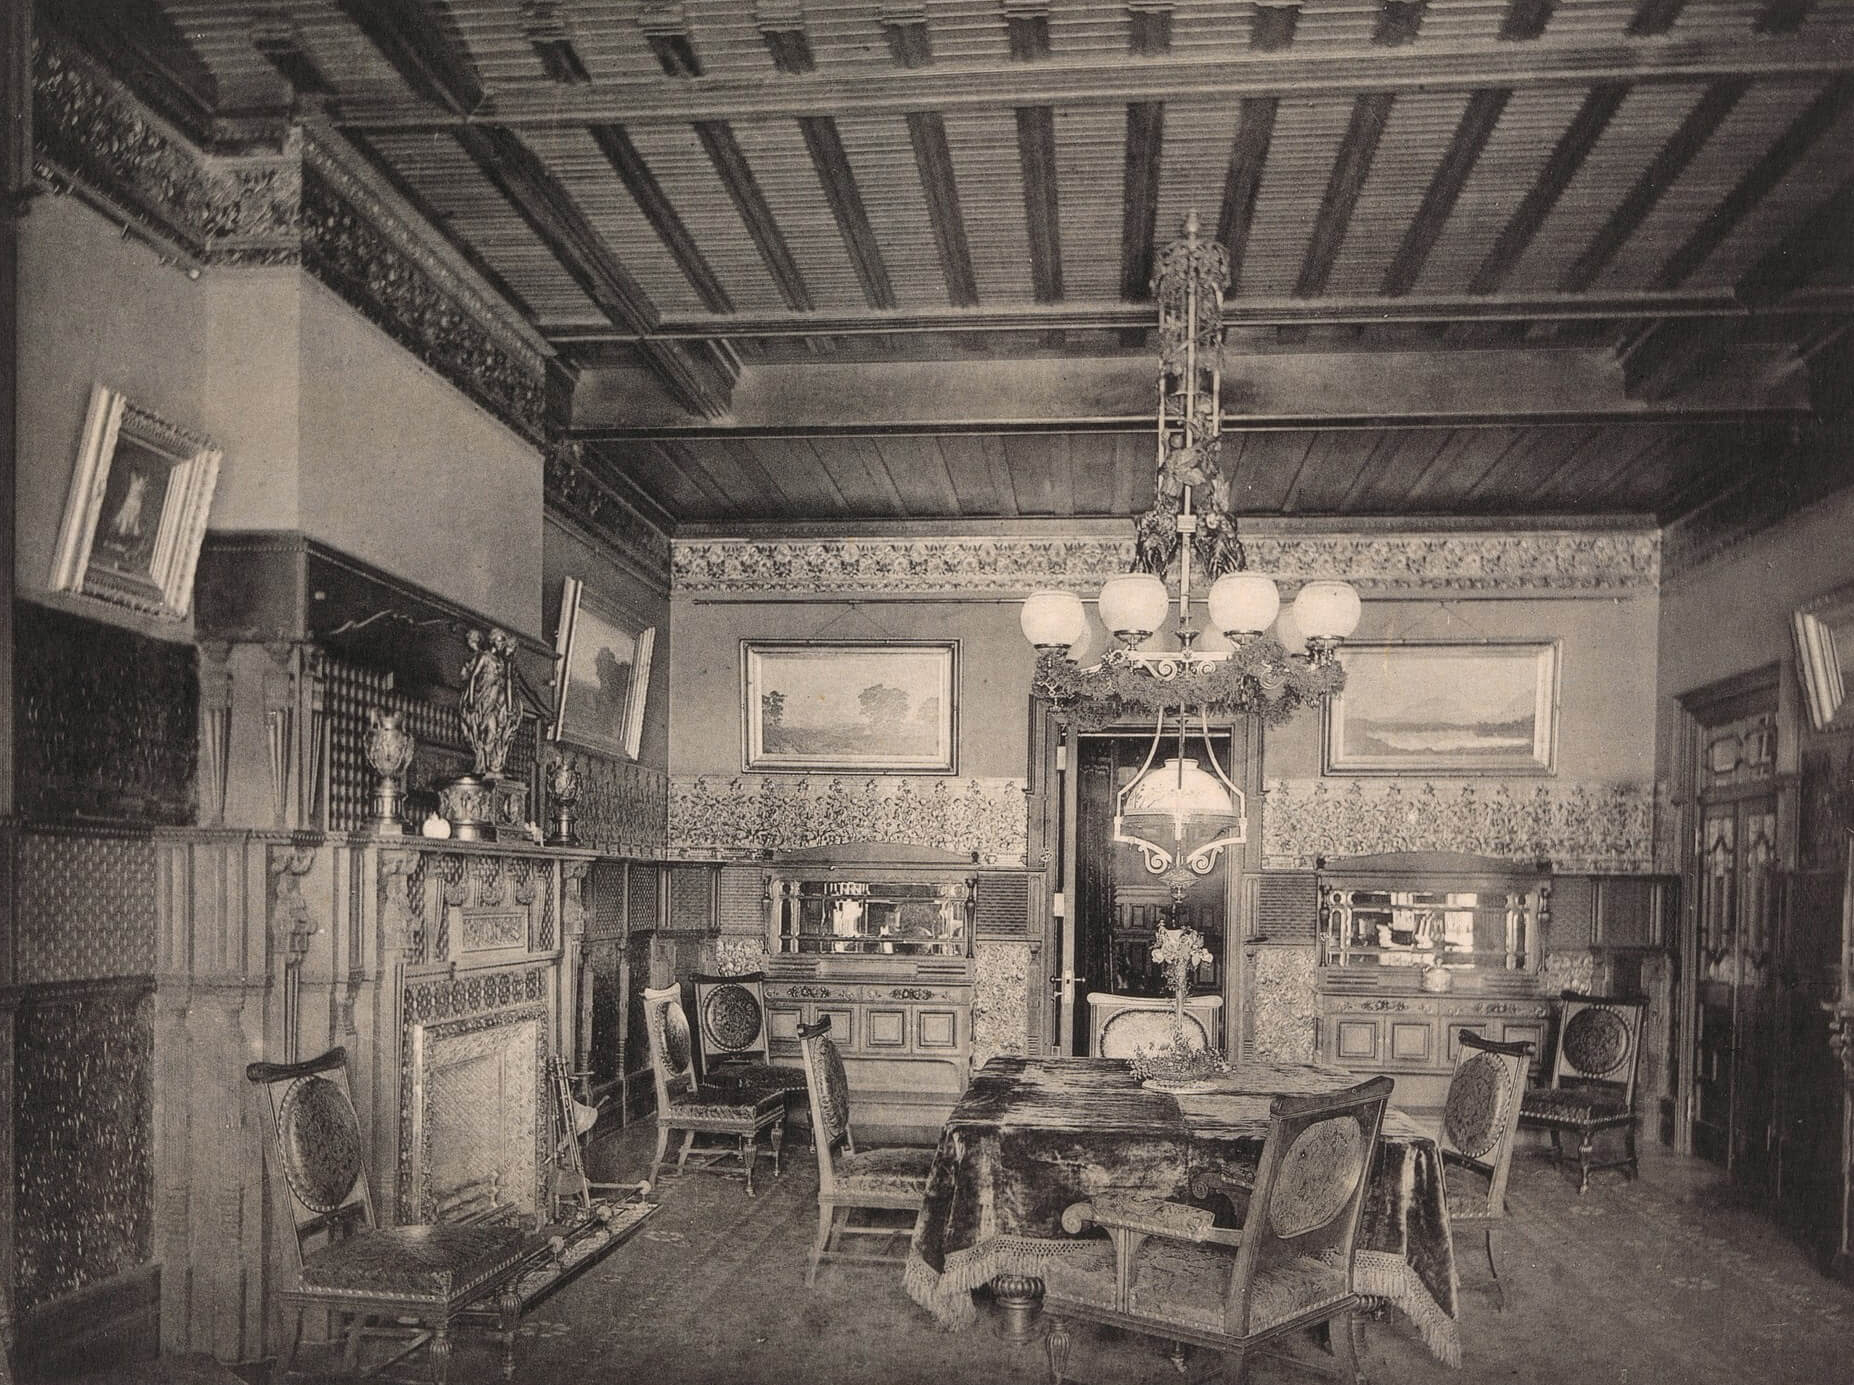 black and white image of a lavish dining room with built-ins